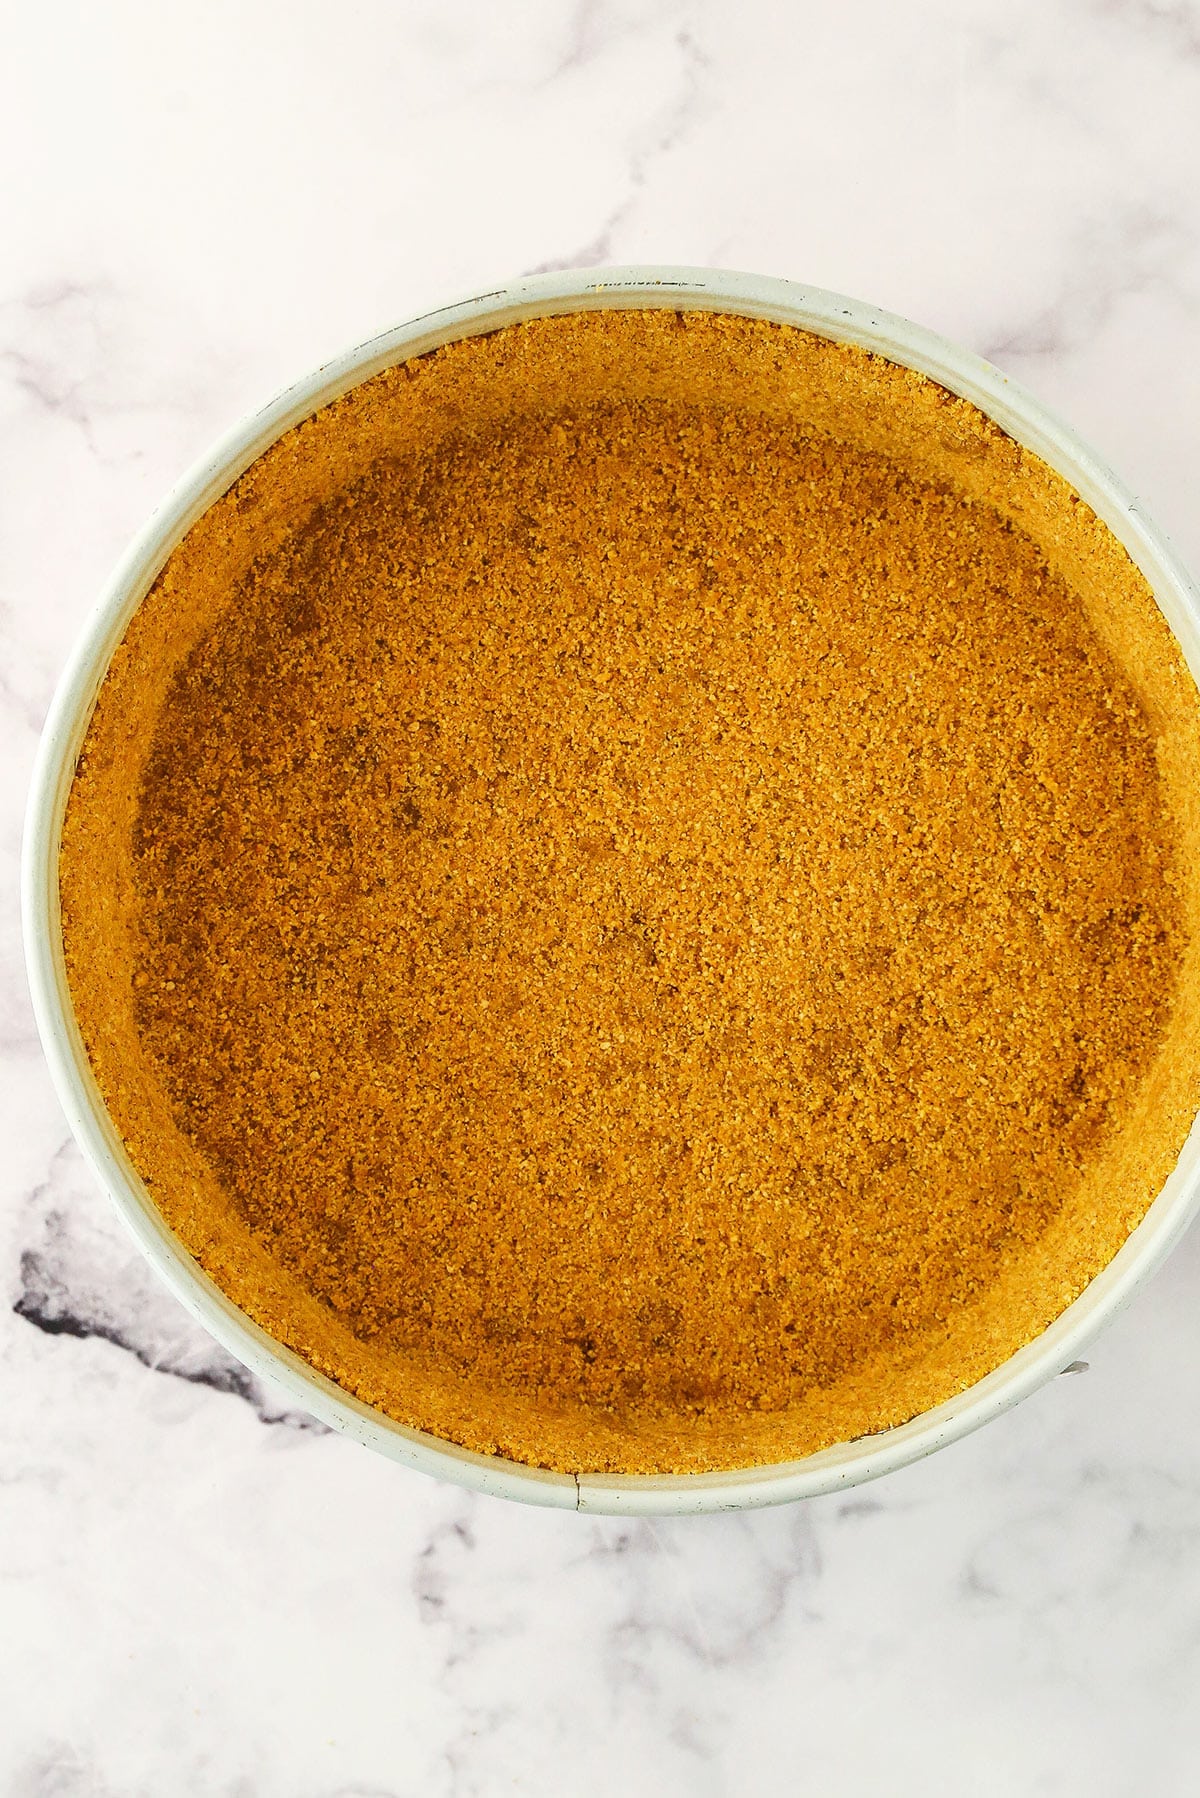 A graham cracker crust pressed firmly into a springform pan